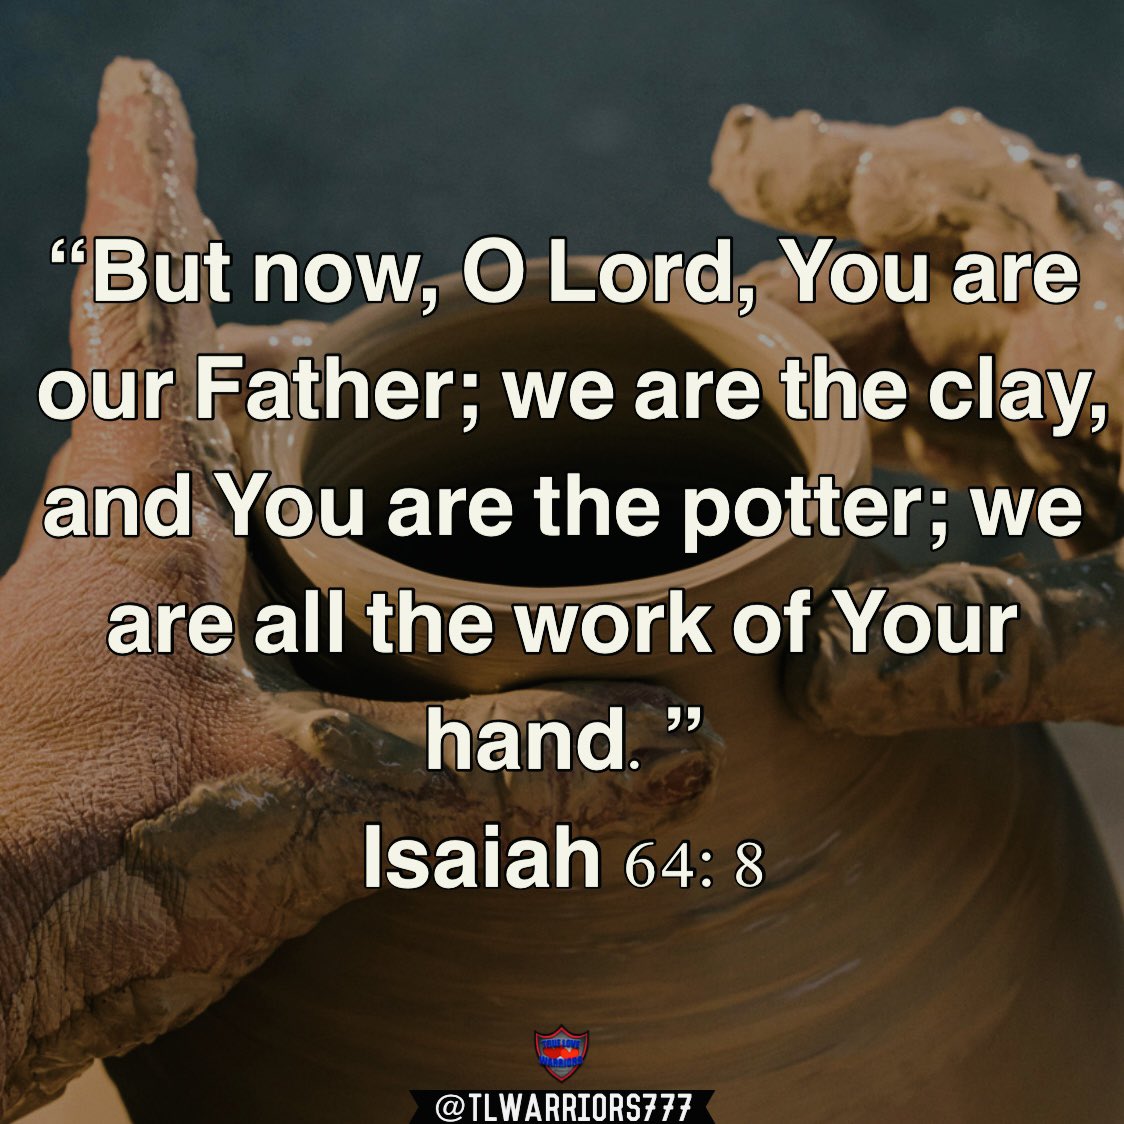 “But now, O Lord, You are our Father; we are the clay, and You are the potter; we are all the work of Your hand.” Isaiah 64:8